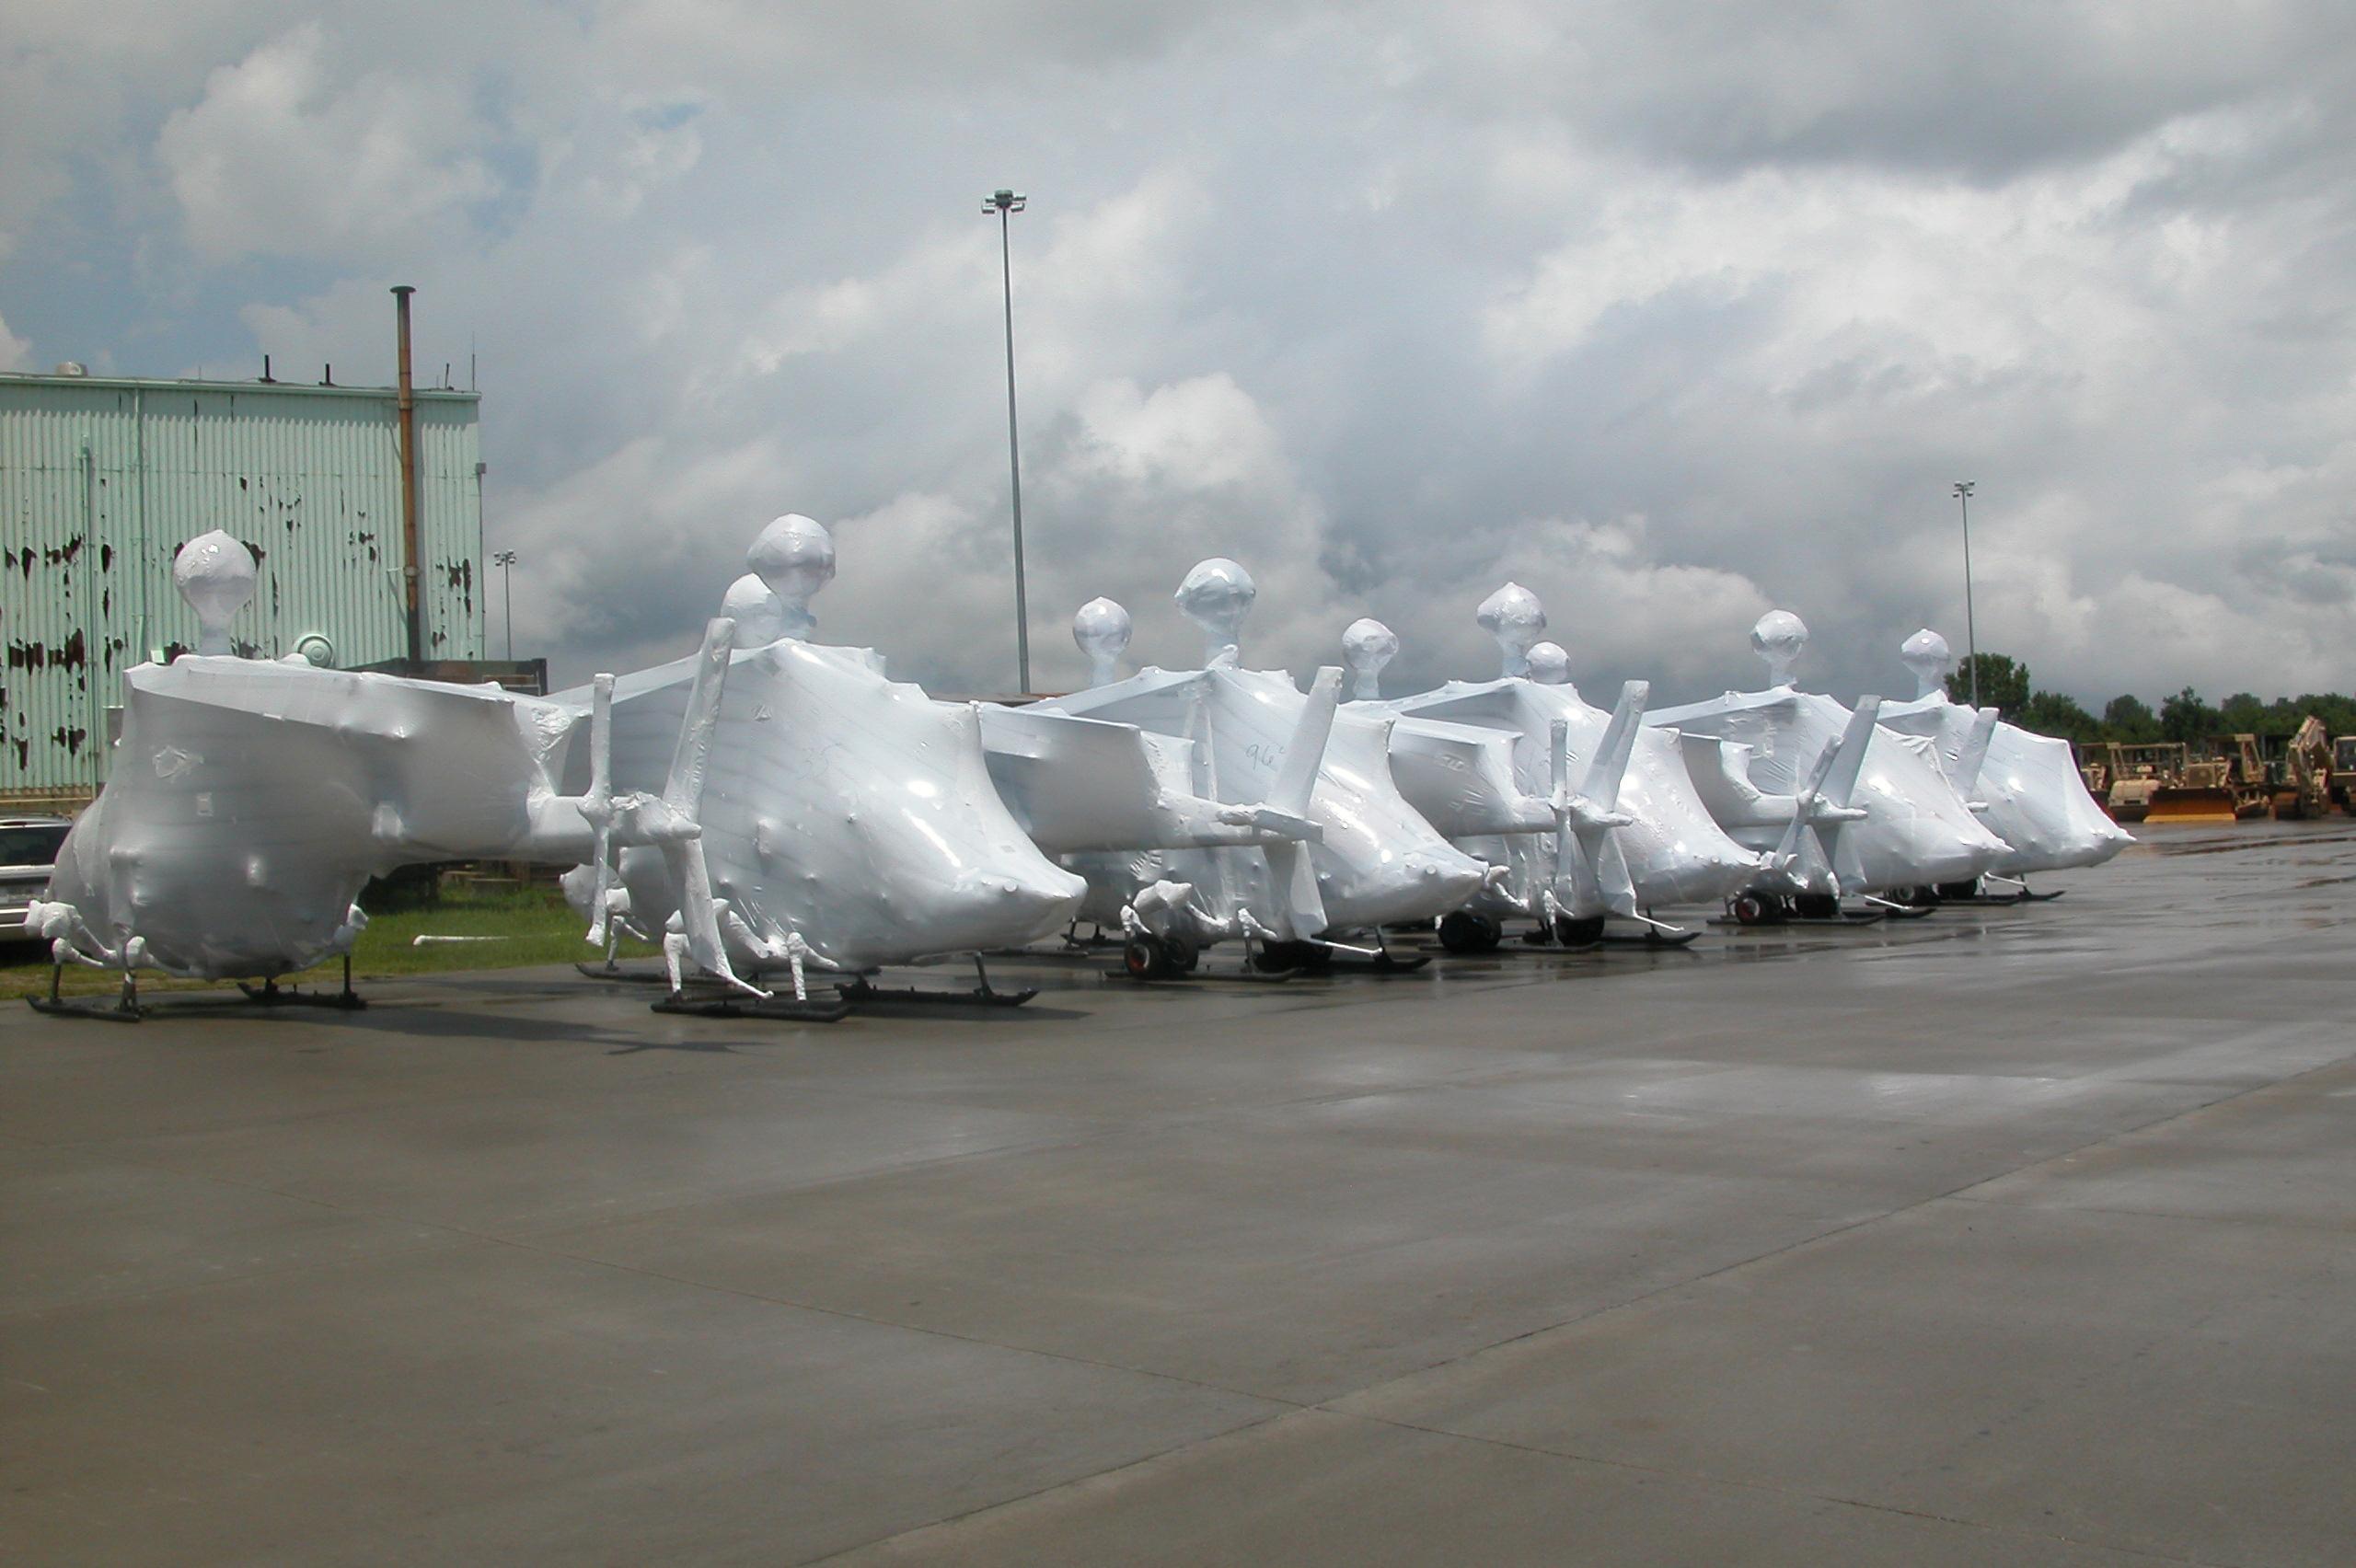 Shrink wrap is so versatile it is even used to wrap up US Navy helicopters for transport (Image: Wikipedia)